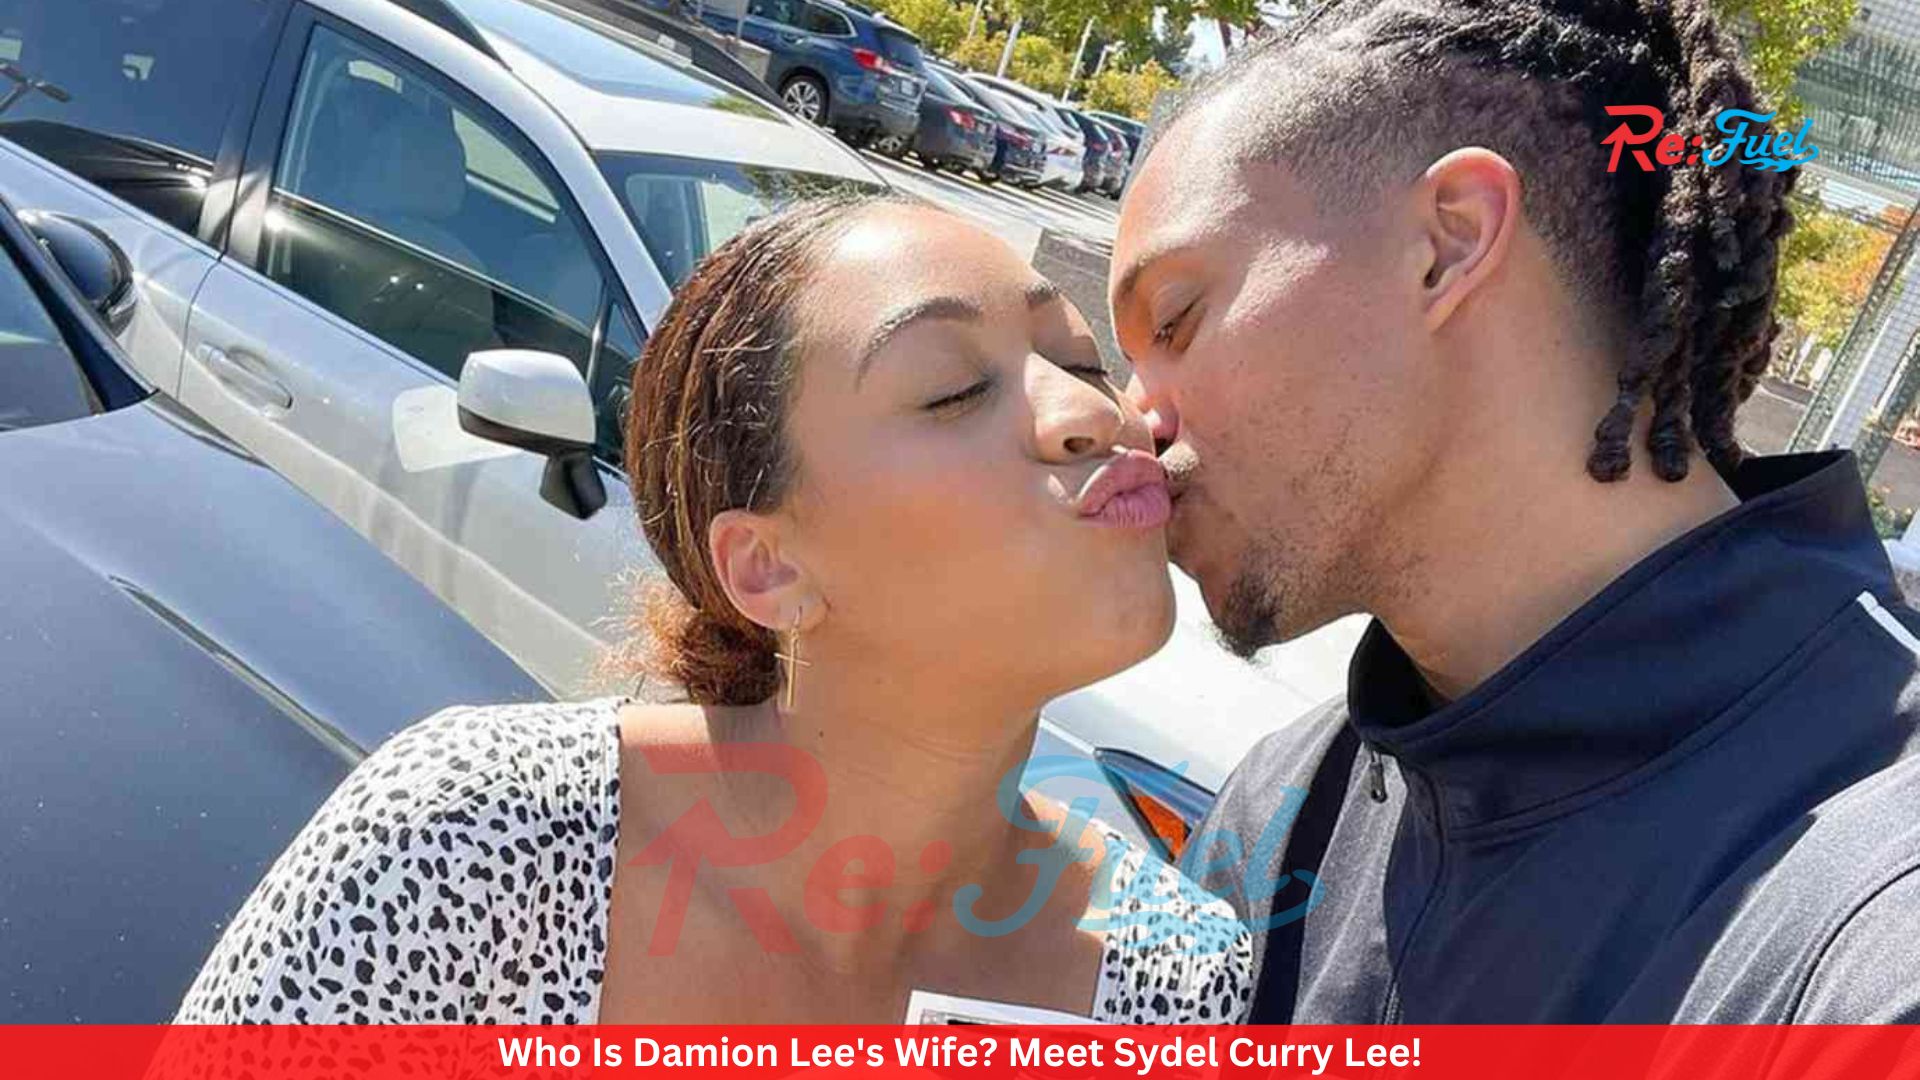 Who Is Damion Lee's Wife? Meet Sydel Curry Lee!